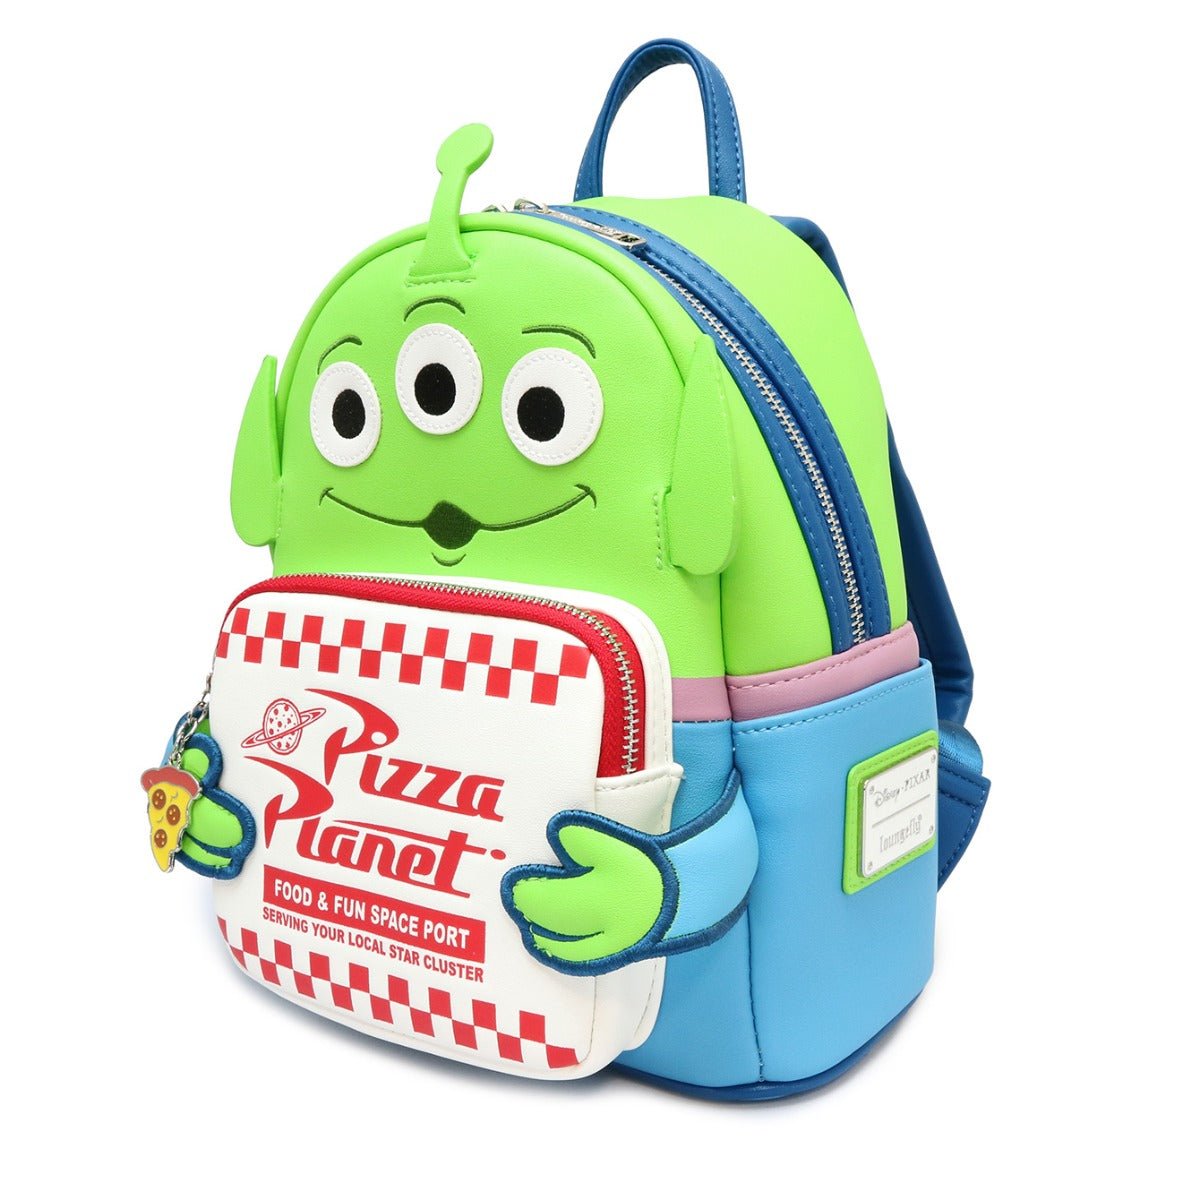 Loungefly x Pixar Toy Story Alien Pizza Box Mini Backpack - GeekCore